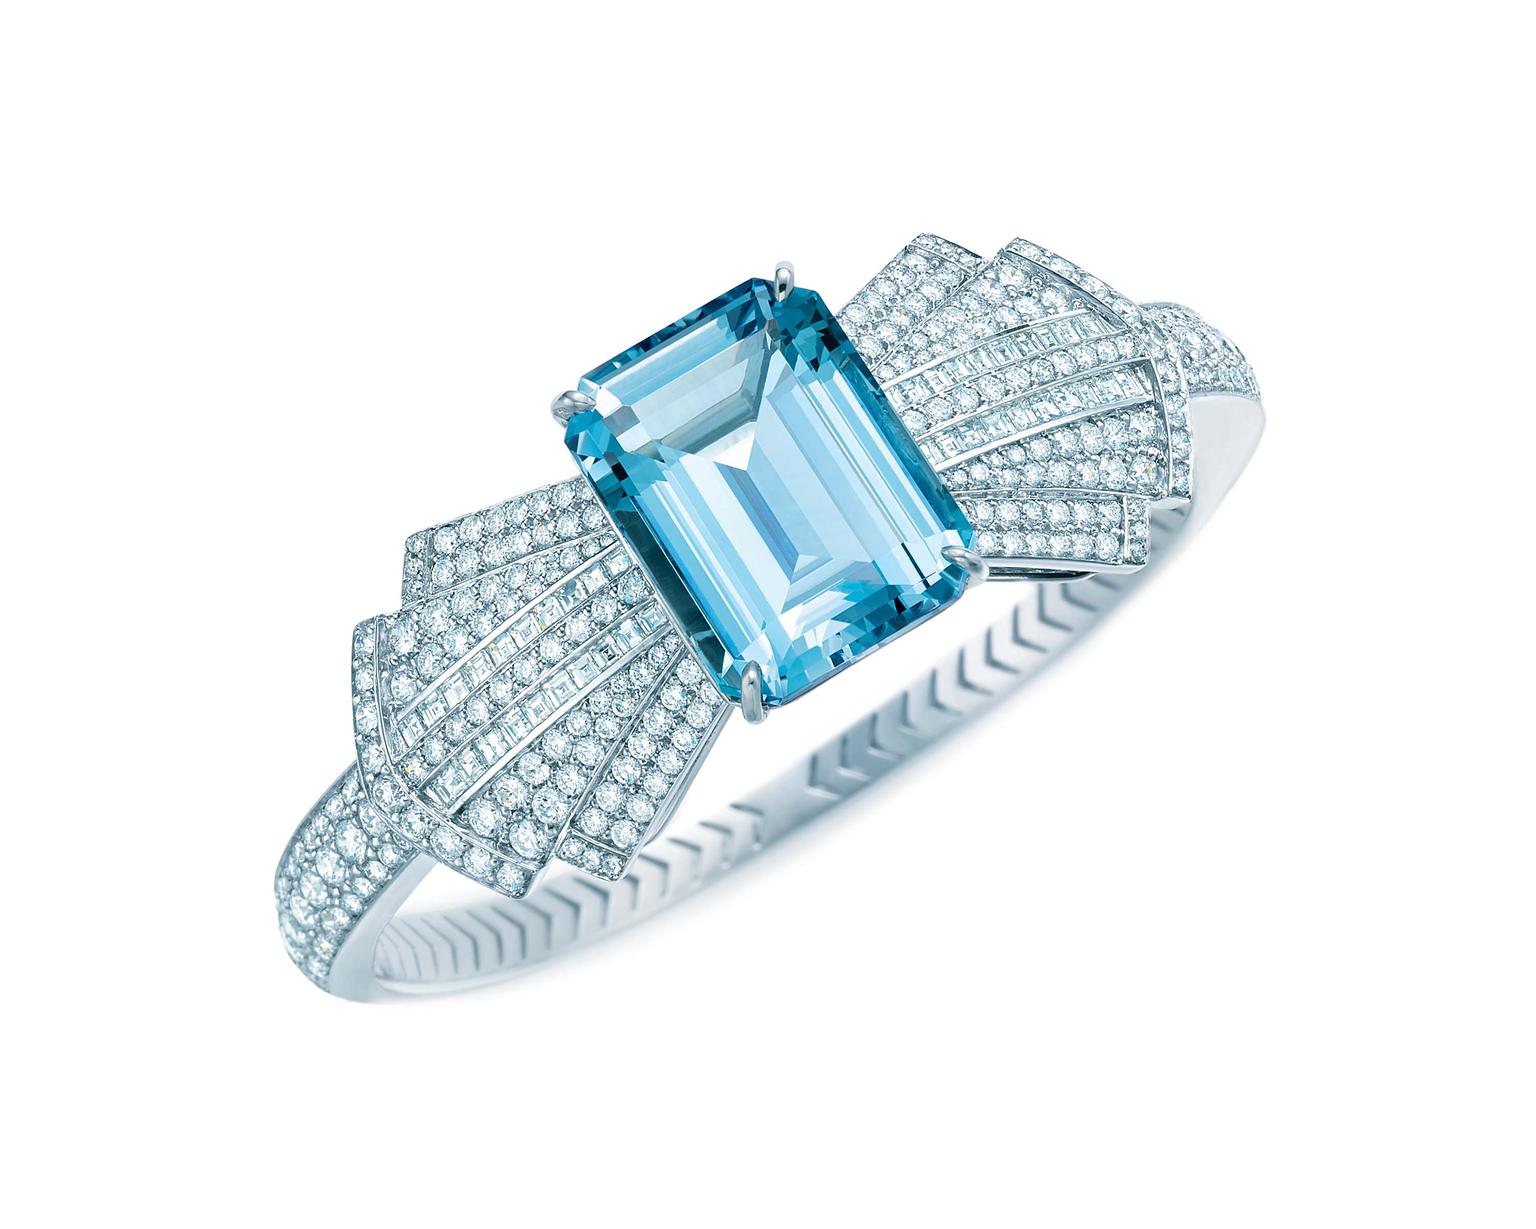 Tiffany & Co. Blue Book Collection platinum bracelet featuring a central emerald cut aquamarine surrounded by a bow tie of diamonds